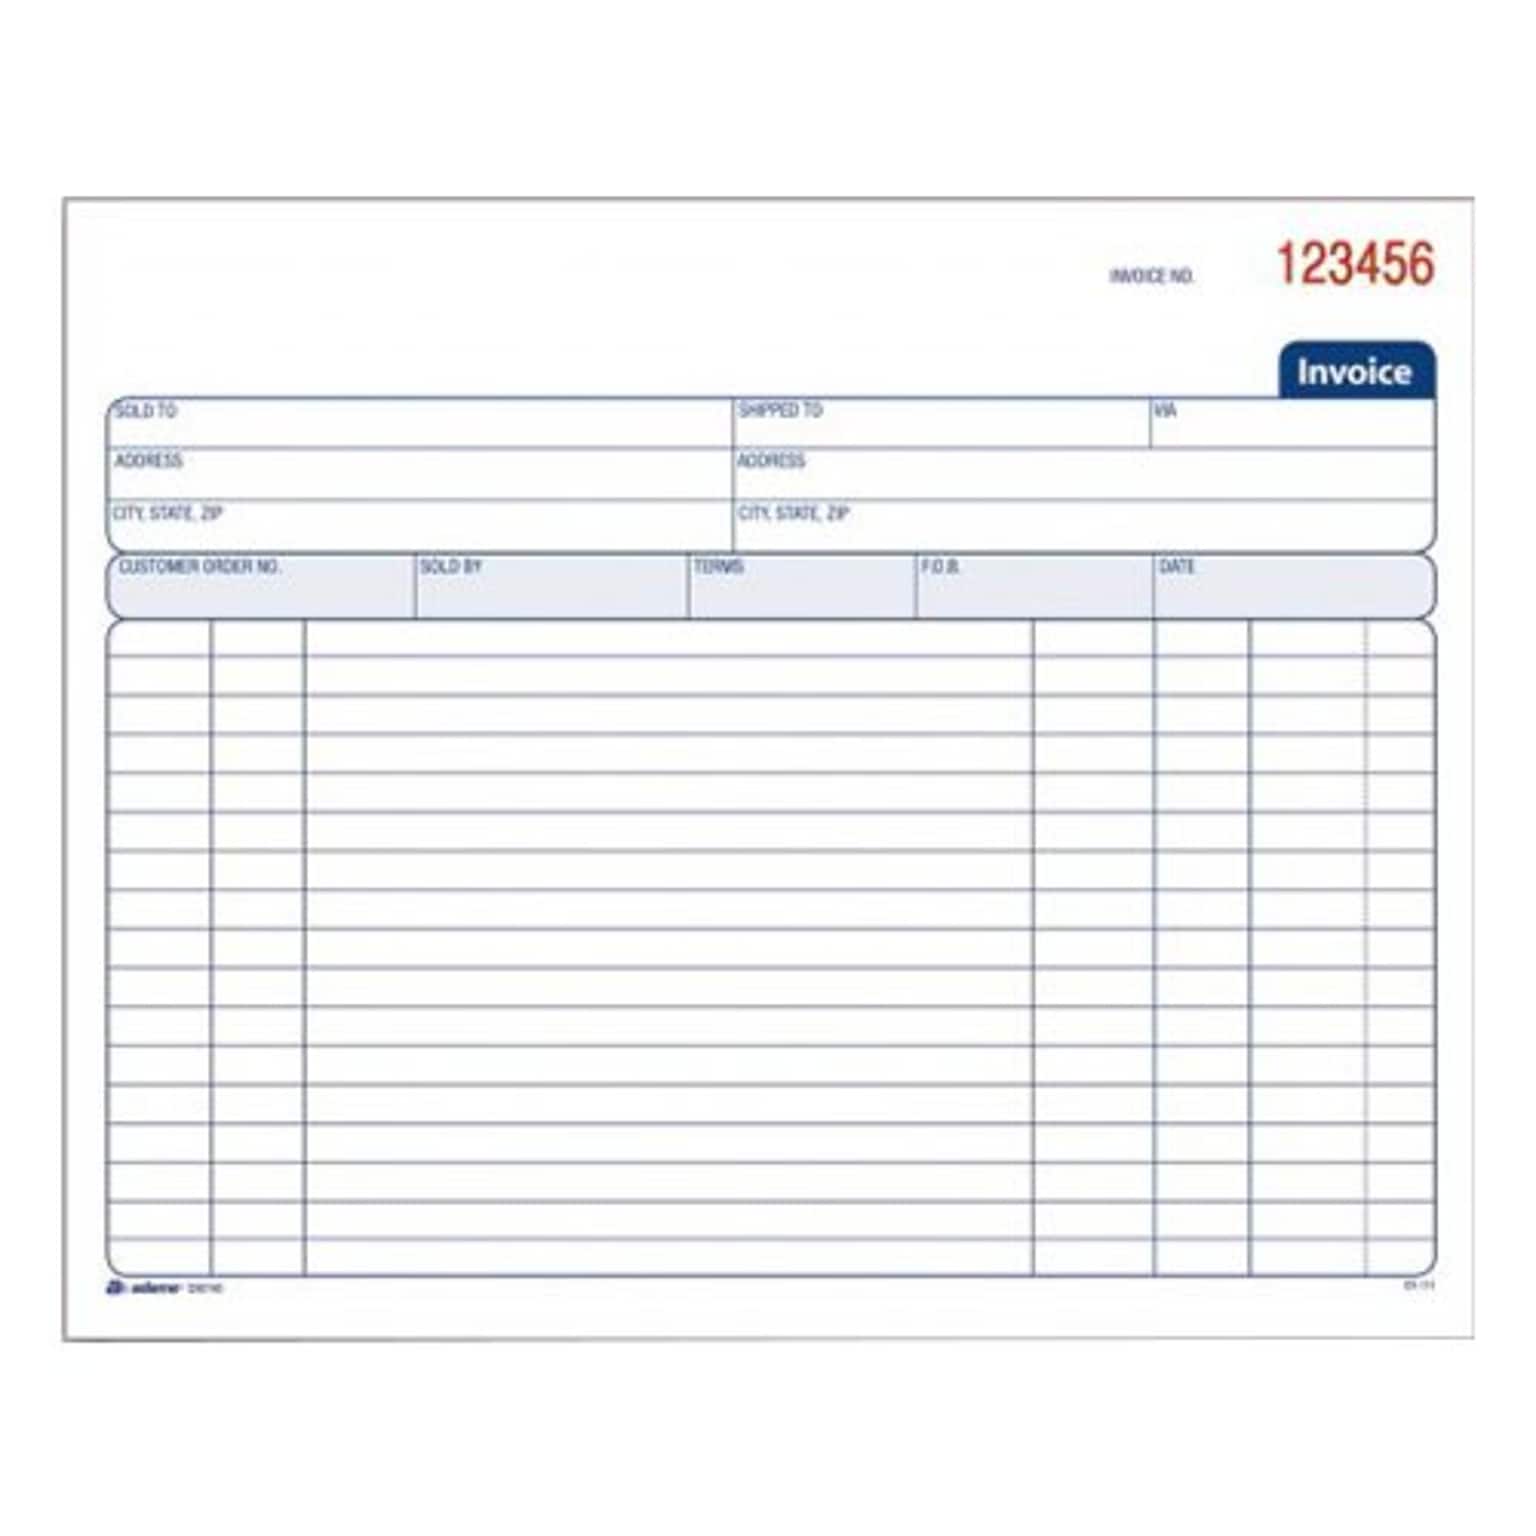 TOPS™ Carbonless Invoice Book, 2-Part, 50 Sheets/Book (D8740)